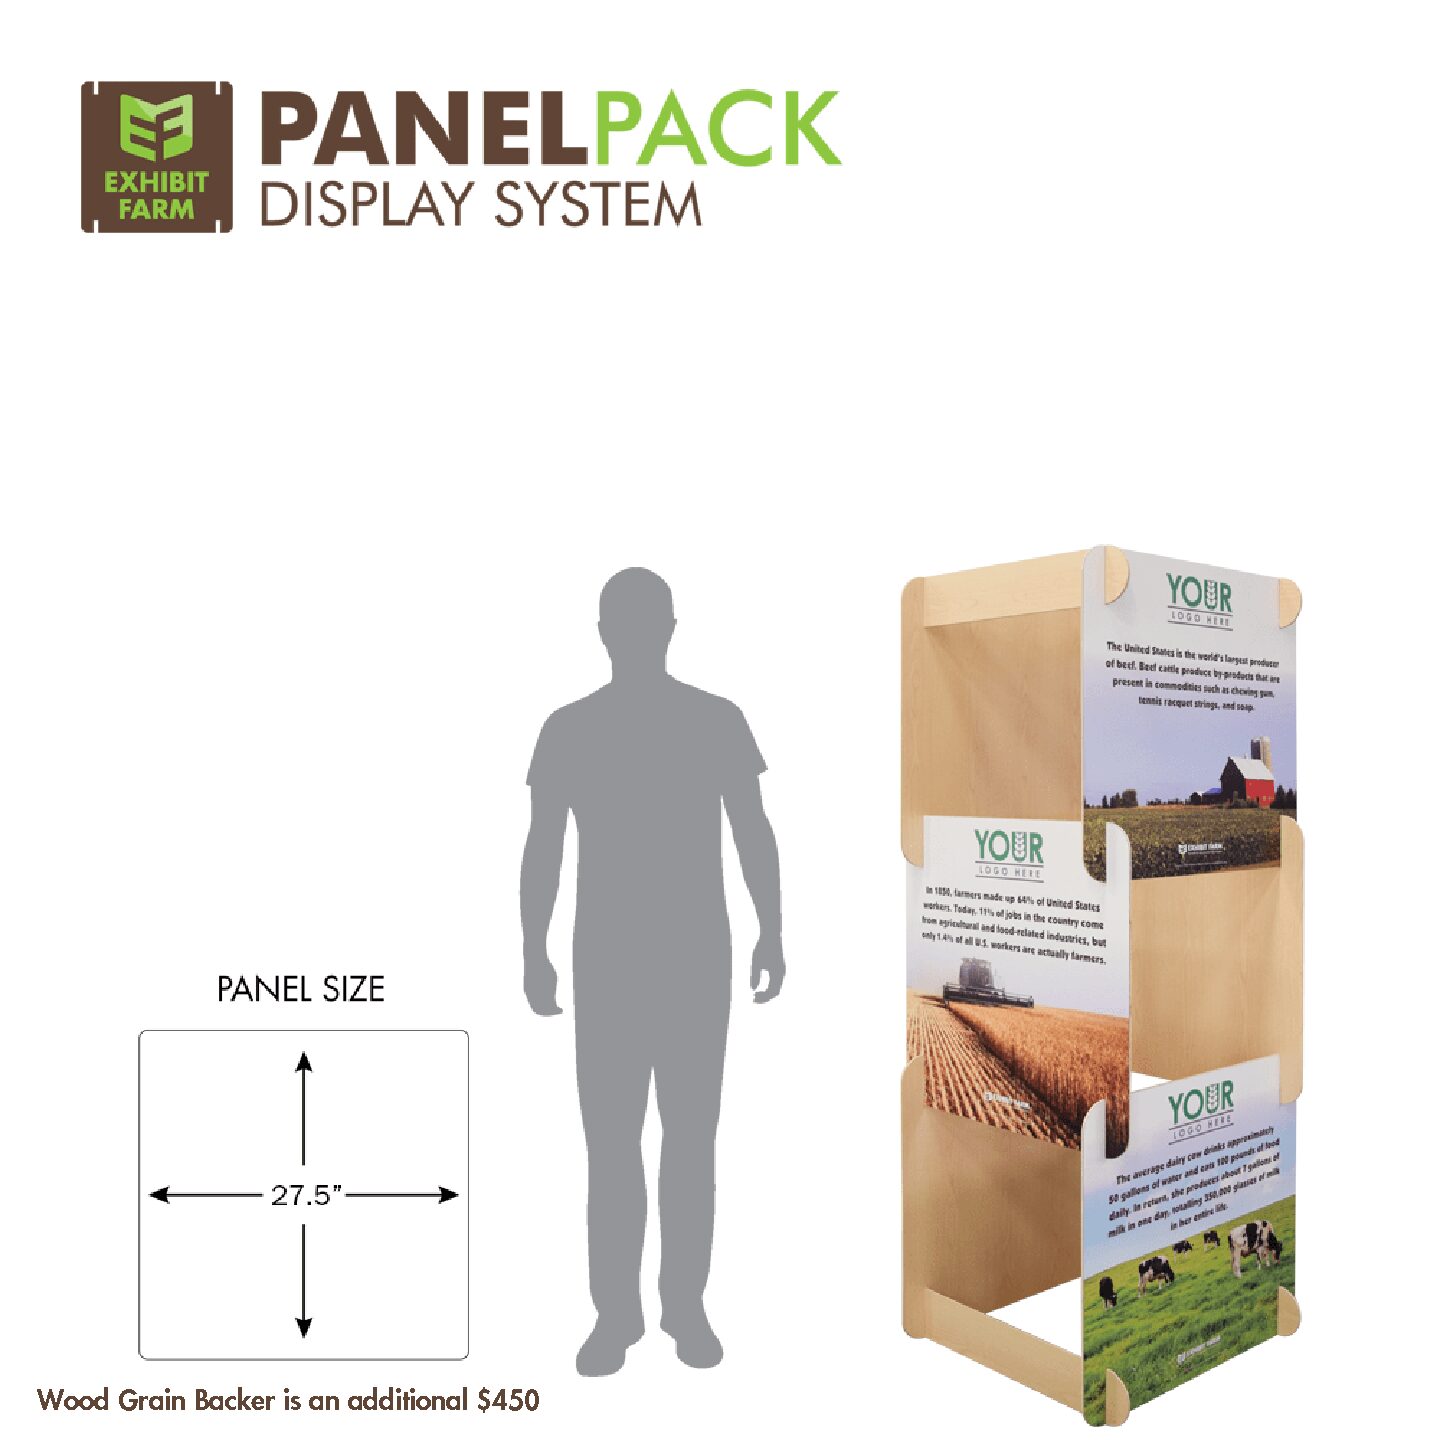 6’ Panel Pack Wood Grain Backer is an additional $450